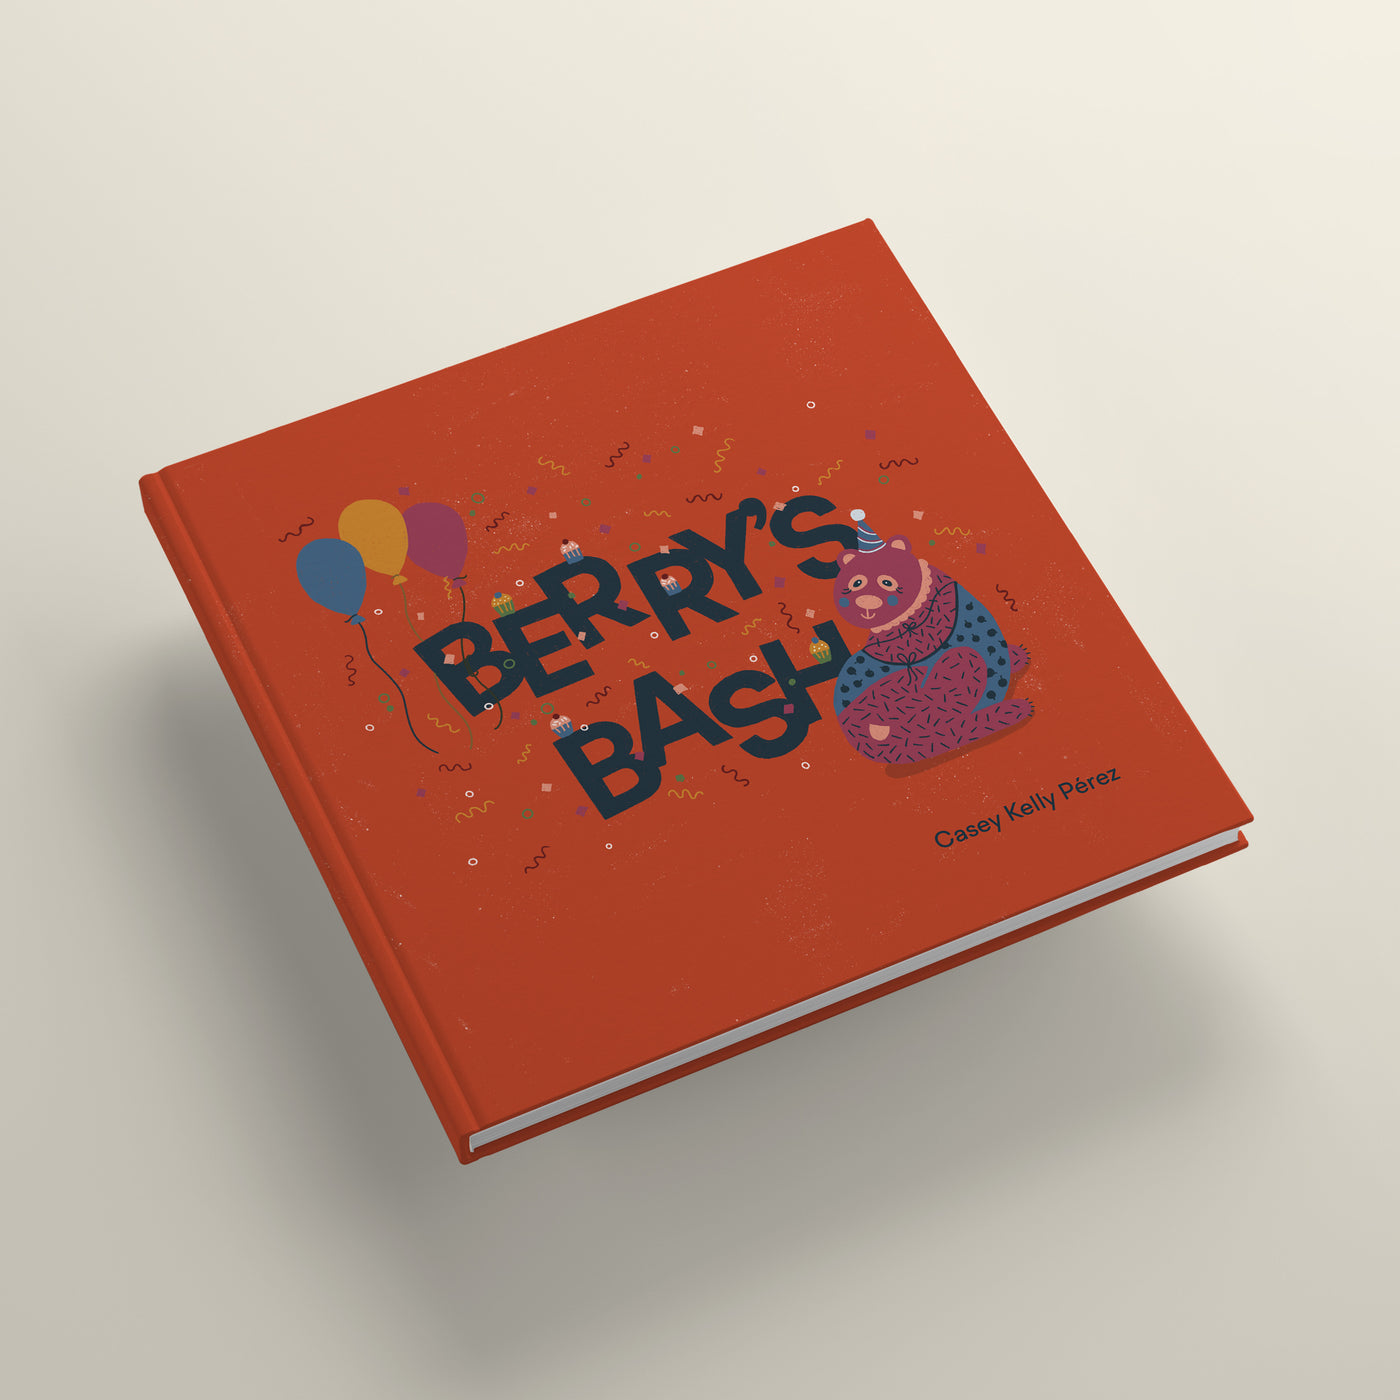 "Berry's Bash" hardcover book cover; features a purple bear wearing a party hat, bear is surrounded by confetti and balloons, handlettering